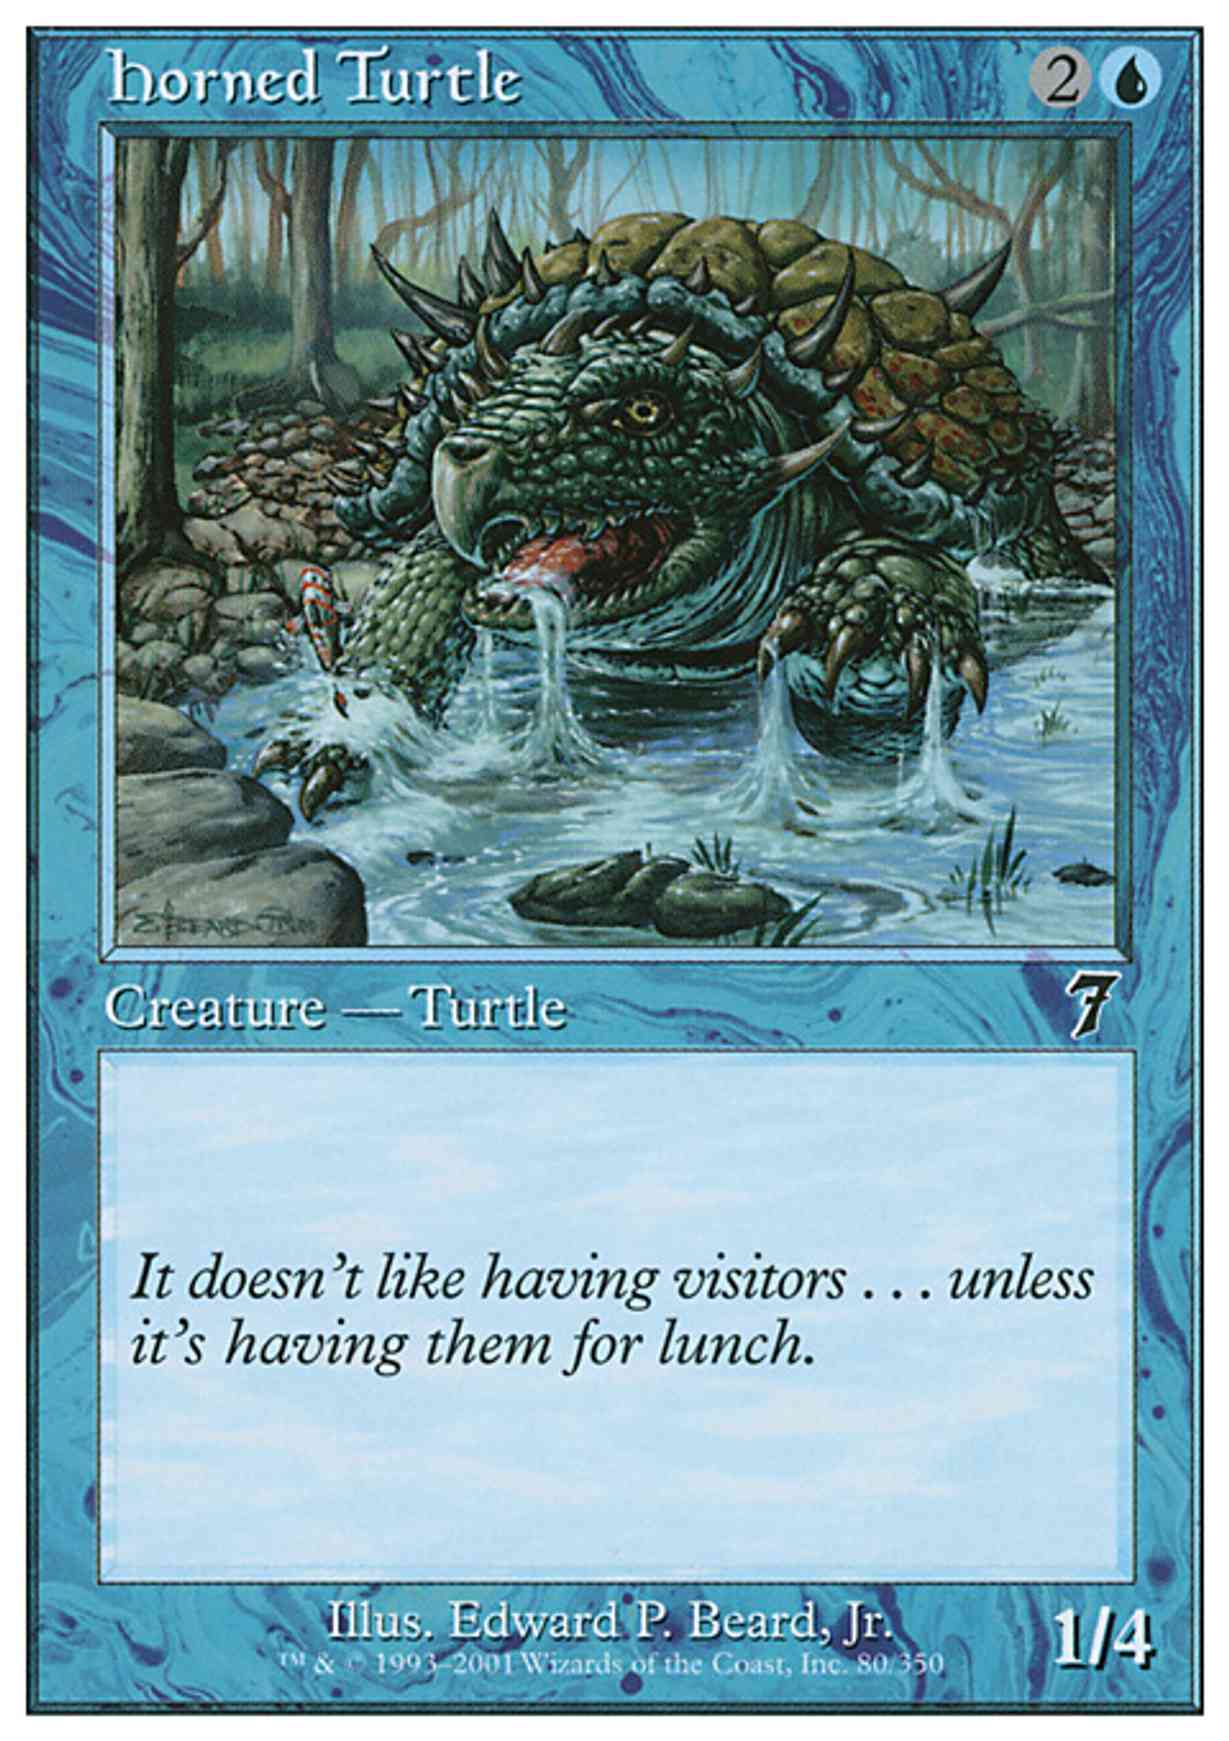 Horned Turtle magic card front